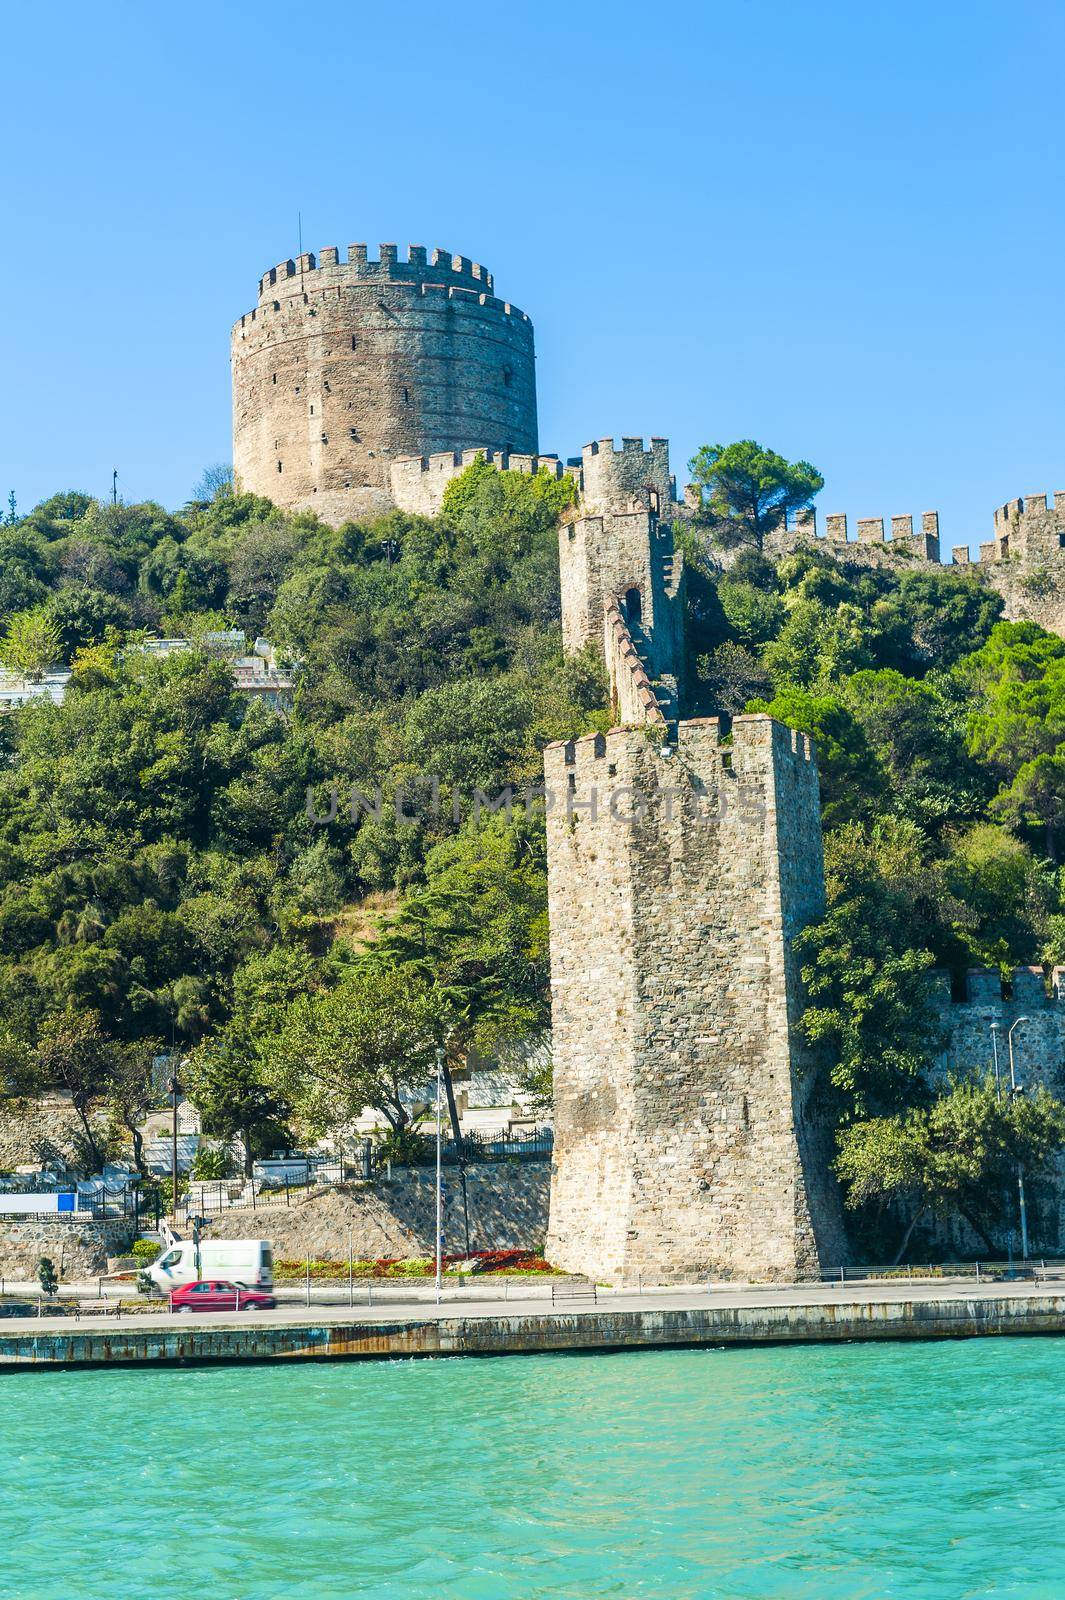 Ancient medieval castle Rumeli Hisari built on a hill above a Bosphorus in Istanbul in Turkey. The fortress was constructed by Ottoman Turks in 15th century before the siege of Byzantine capital Constantinople